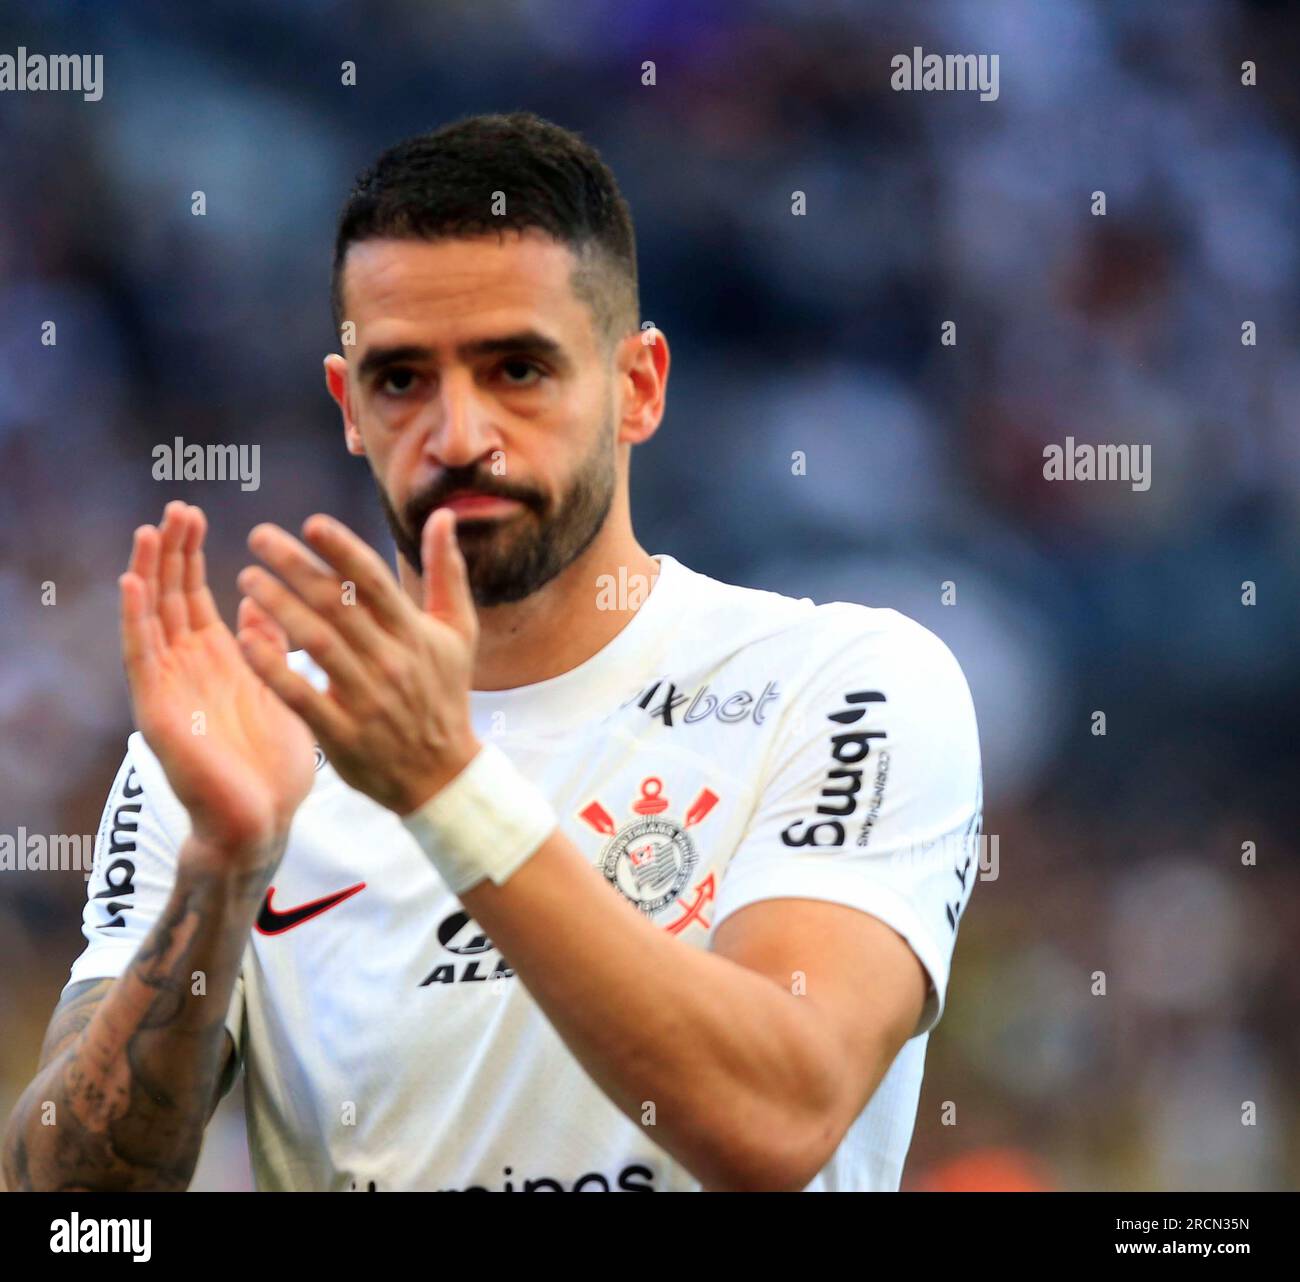 Sao Paulo, Brazil. 15th July, 2023. Renato Augusto during a match between Corinthians and America Mg at Neo Quimica Arena in Sao Paulo, Brazil (Fernando Roberto/SPP) Credit: SPP Sport Press Photo. /Alamy Live News Stock Photo